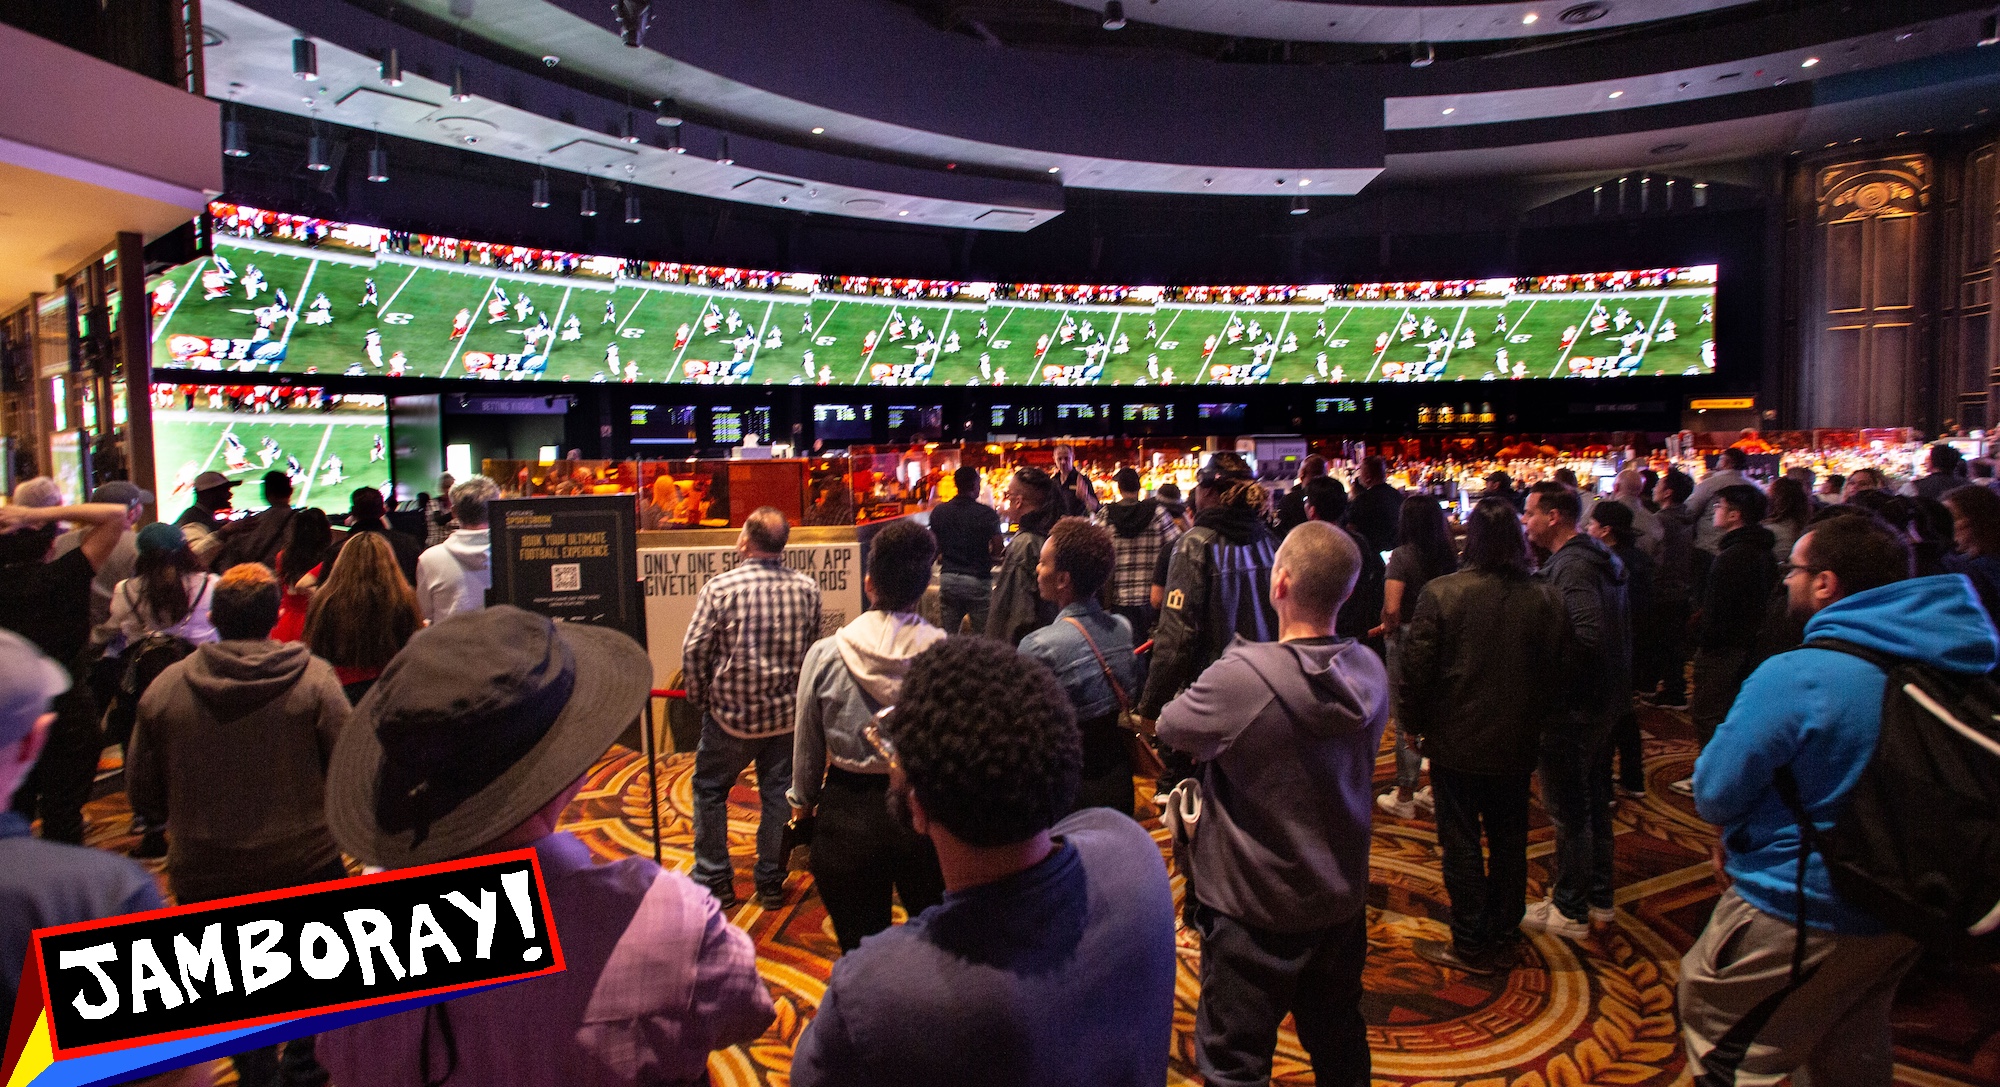 LAS VEGAS, NV - FEBRUARY 12: Crowds jam into Caesars Sports Book at Caesars Palace Hotel &amp; Casino to bet on the Kansas City Chiefs vs Philadelphia Eagles in the National Football League's Super Bowl LVII (which took place in Glendale, Arizona) as viewed on February 12, 2023 in Las Vegas, Nevada. Las Vegas will play host to the NFL's Super Bowl LVIII, taking place next year at the recently constructed Allegiant Stadium, home of the Las Vegas Raiders. (Photo by George Rose/Getty Images)